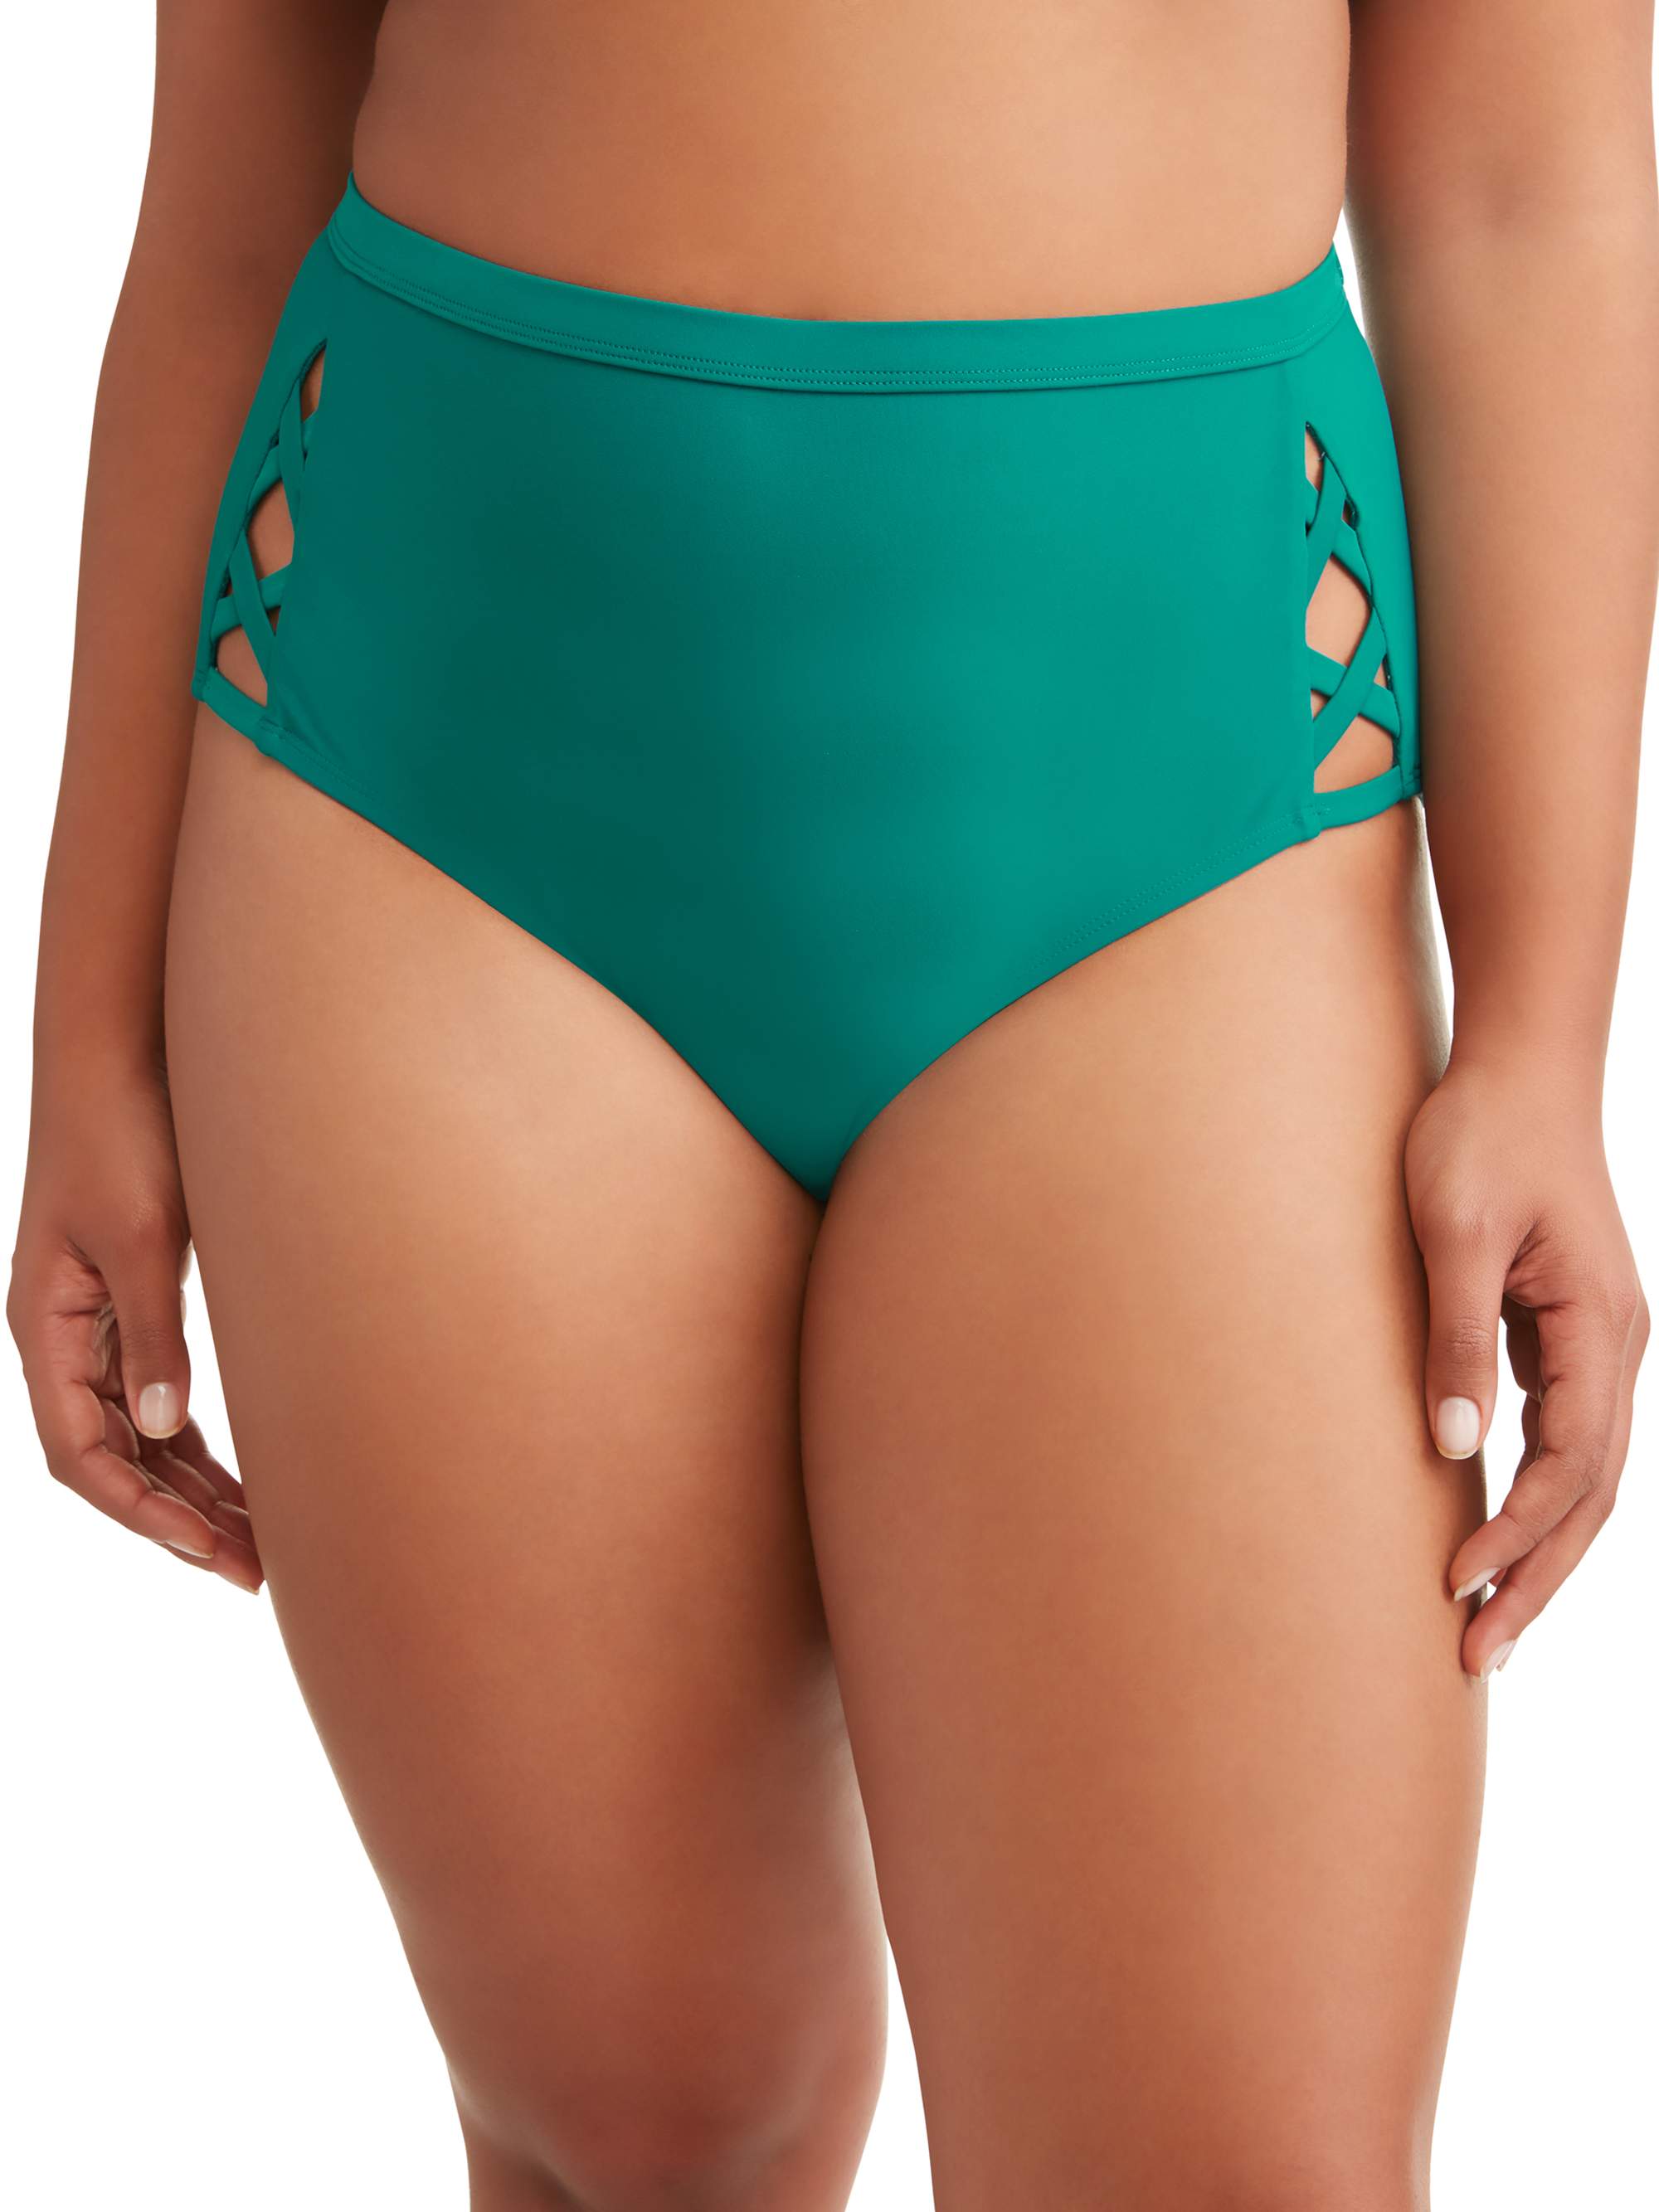 Women's Plus Solid Cabo Swimsuit Bottom - image 1 of 4